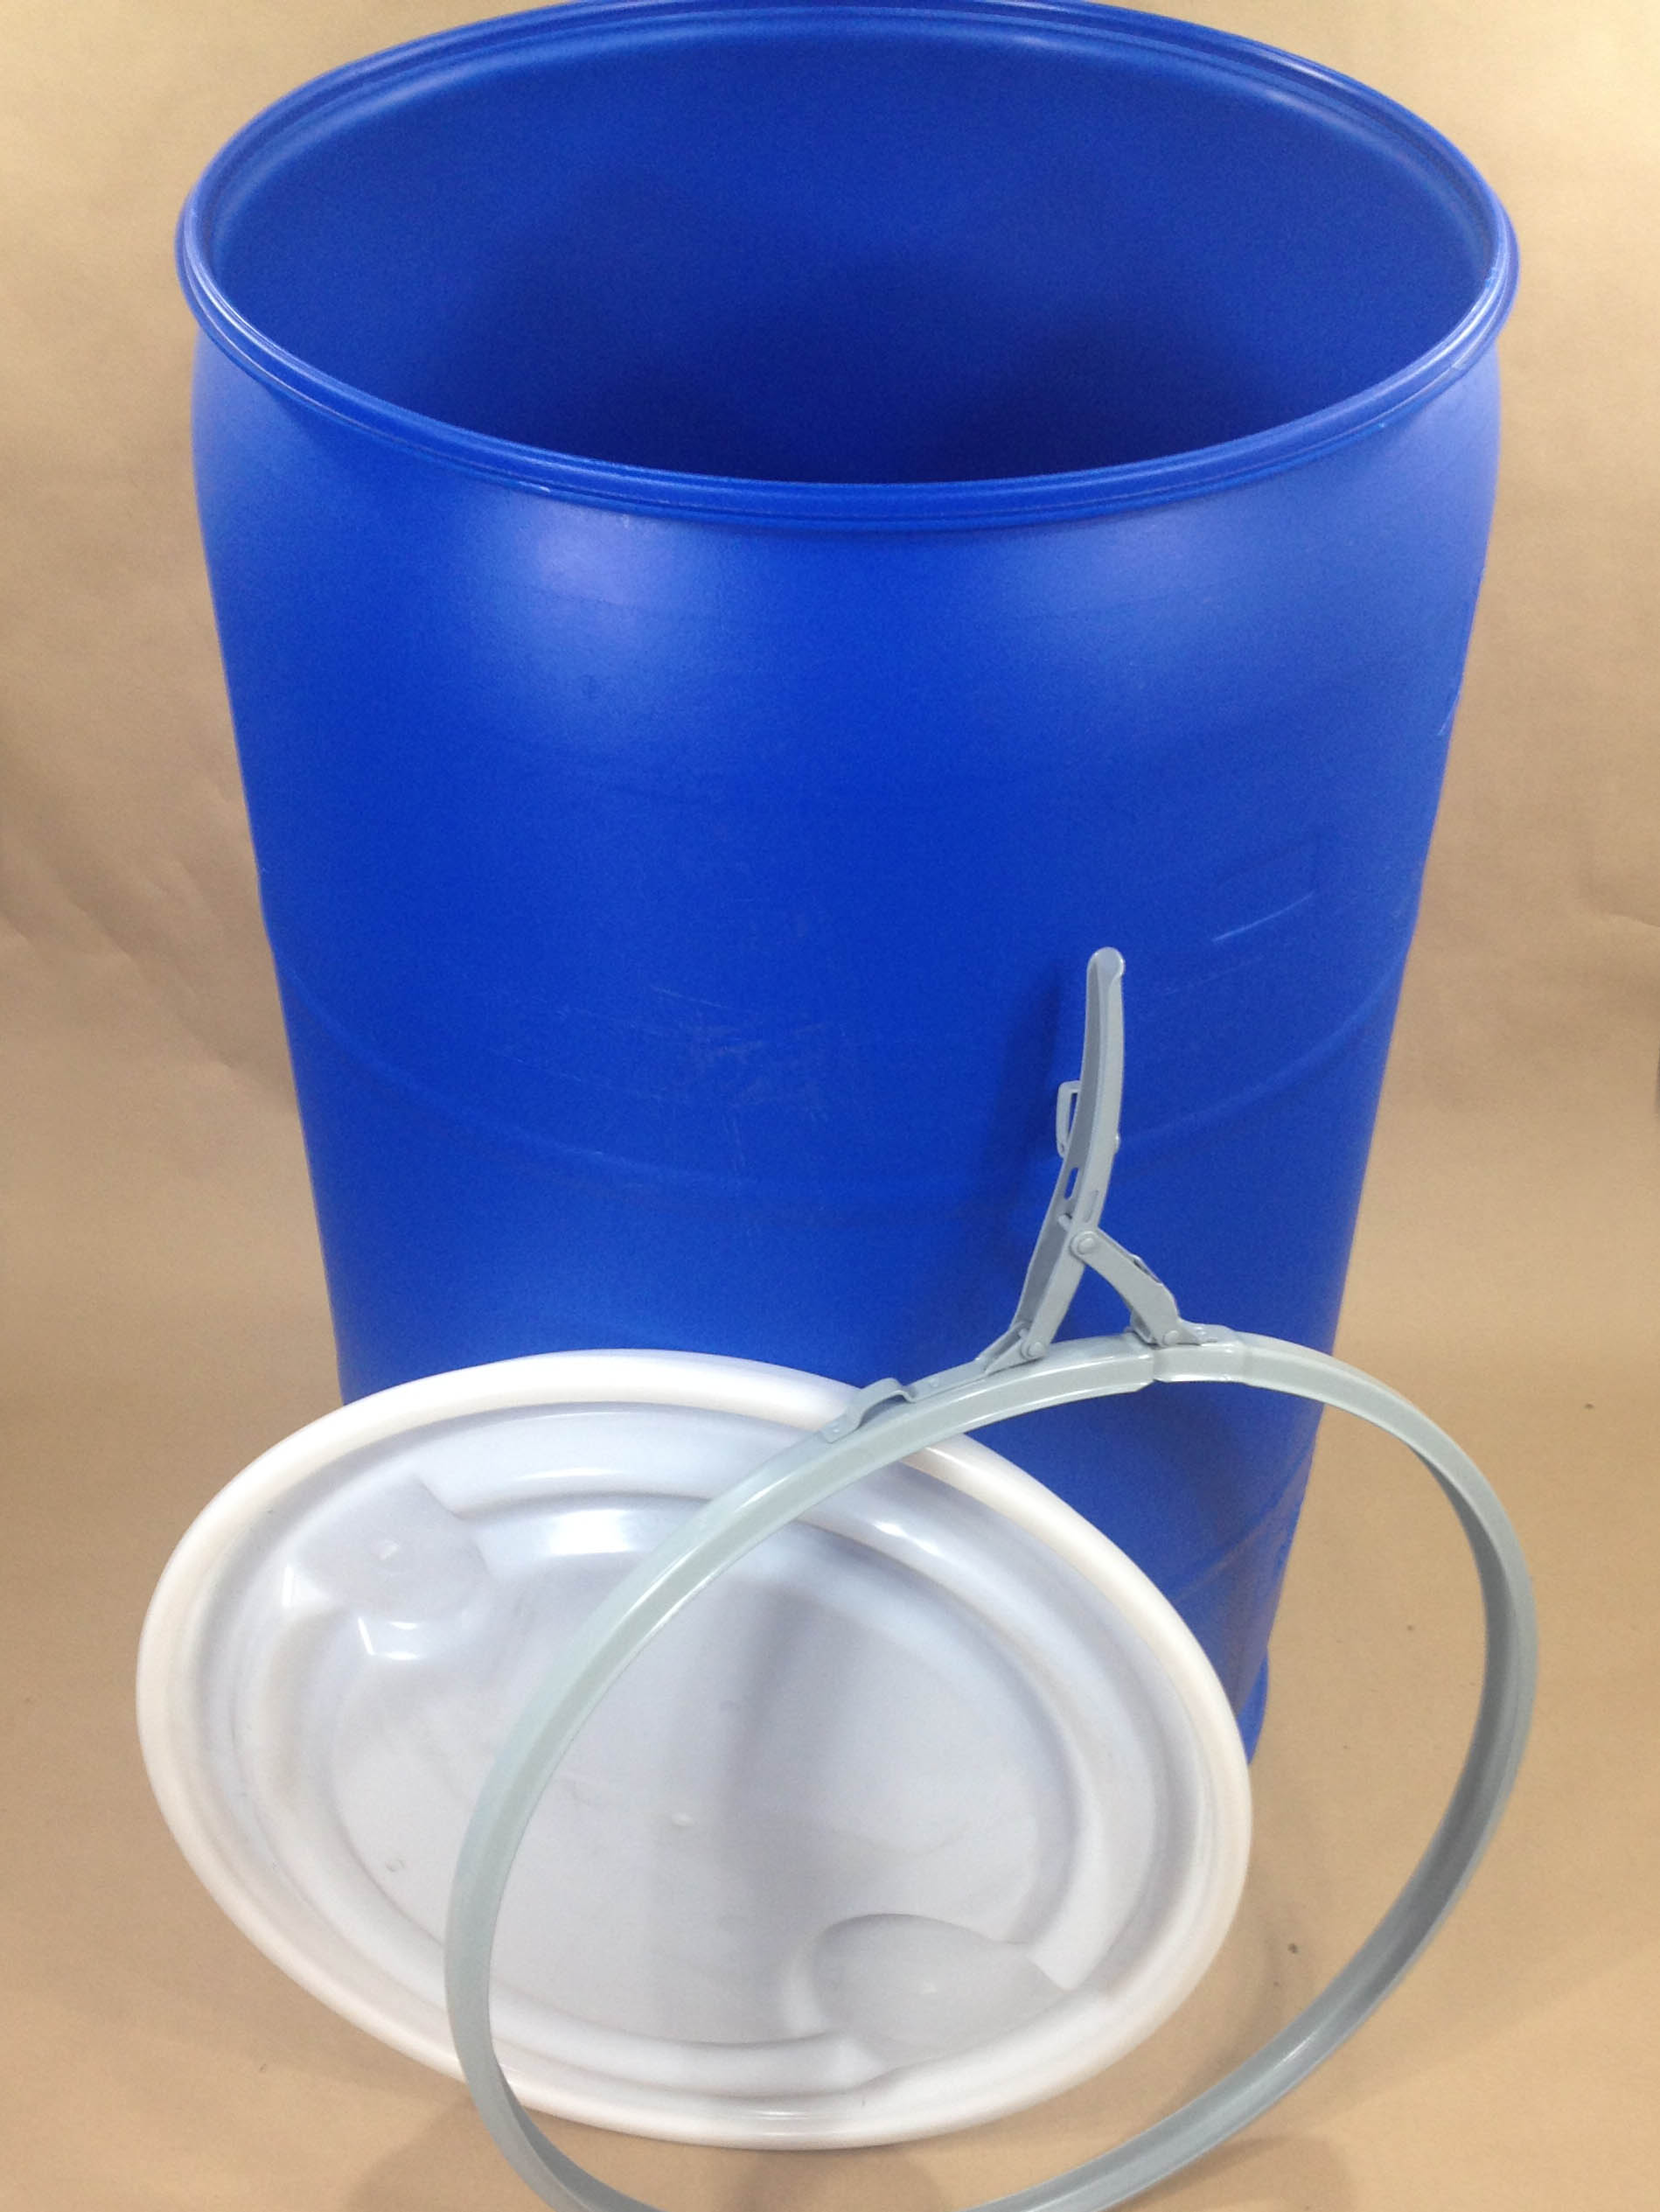 Food grade 55 gallon plastic drum | Yankee Containers: Drums, Pails